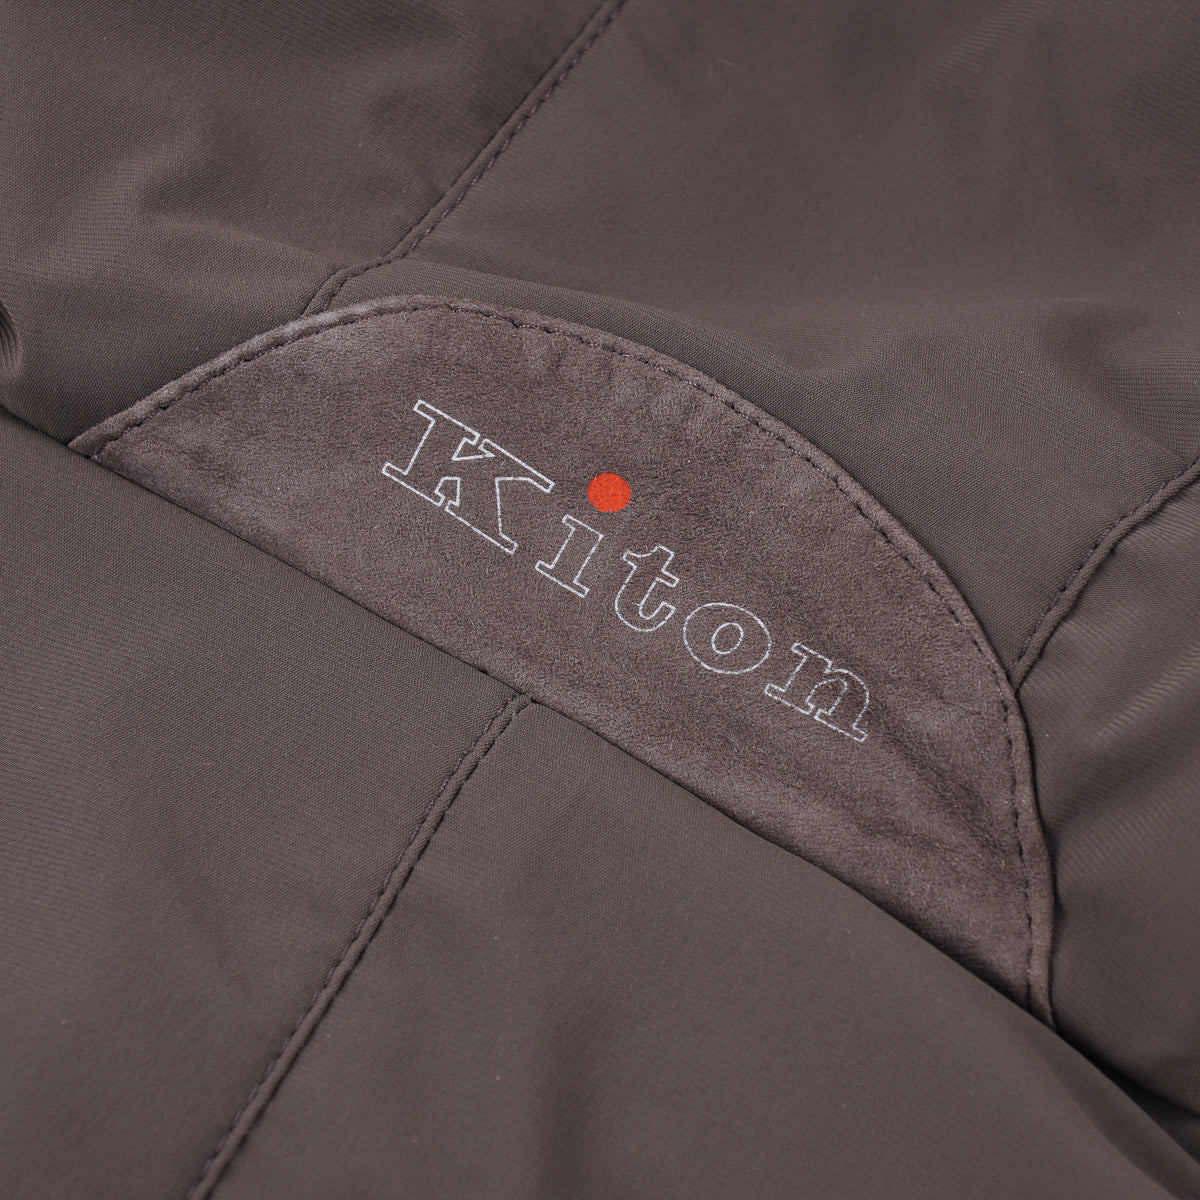 Kiton Jacket with Superfine Jersey Wool Liner - Top Shelf Apparel